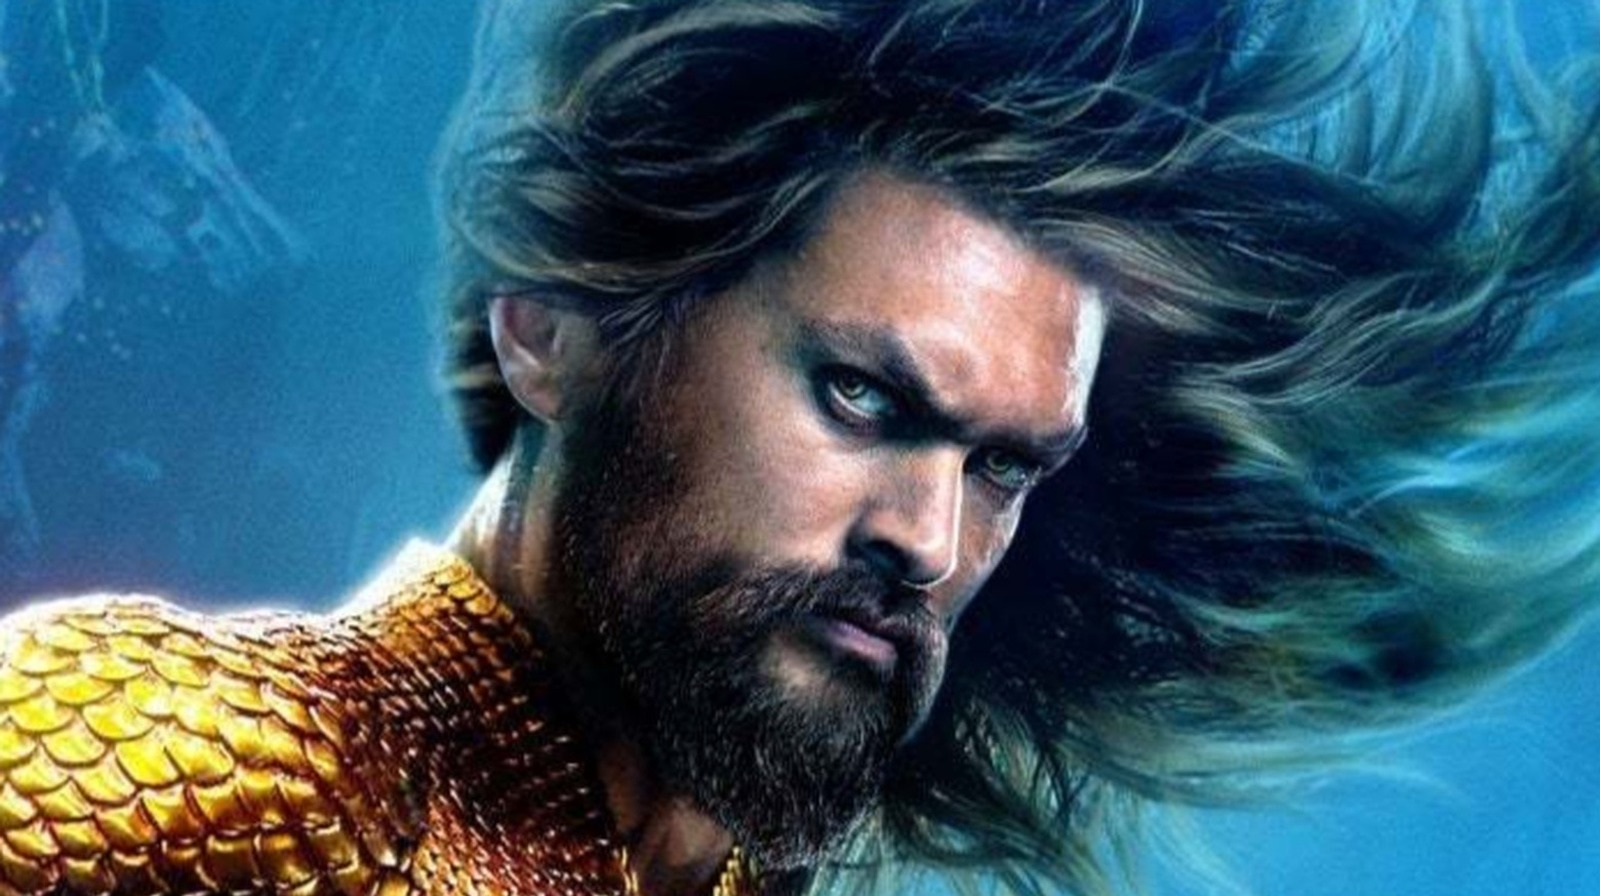 New Snyder Cut Teaser Has Aquaman Fans Hyped